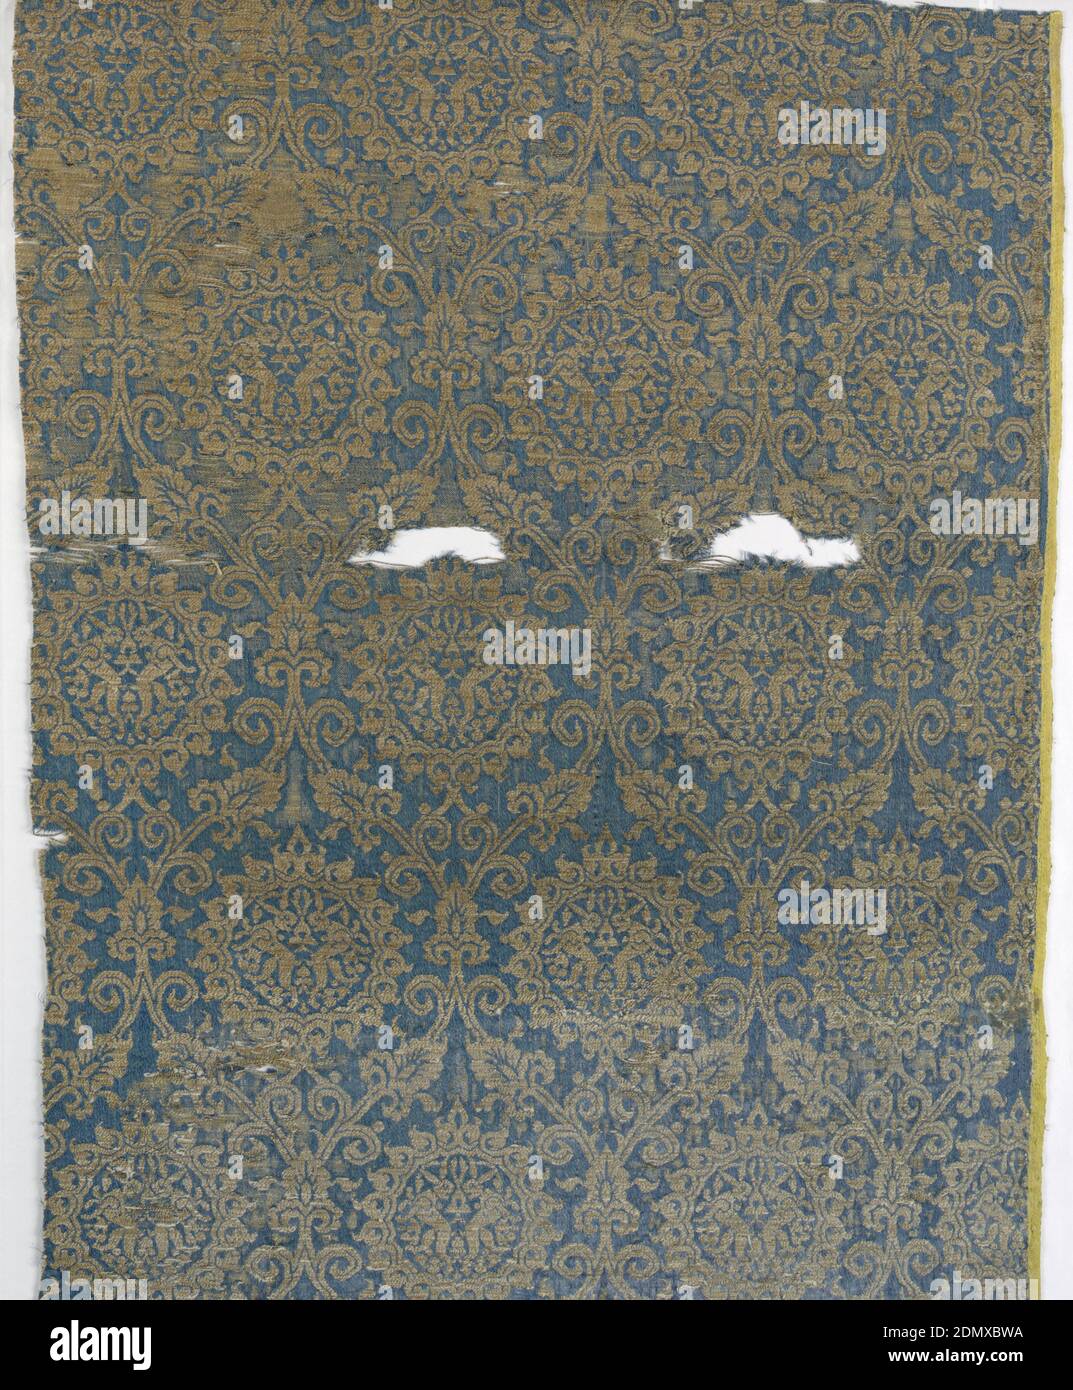 Fragment, Medium: silk, gilded animal membrane around linen core Technique: 4&1 satin and plain weave (lampas), Medallions holding addorsed hares in gold on dark blue., Italy, 14th century, woven textiles, Fragment Stock Photo